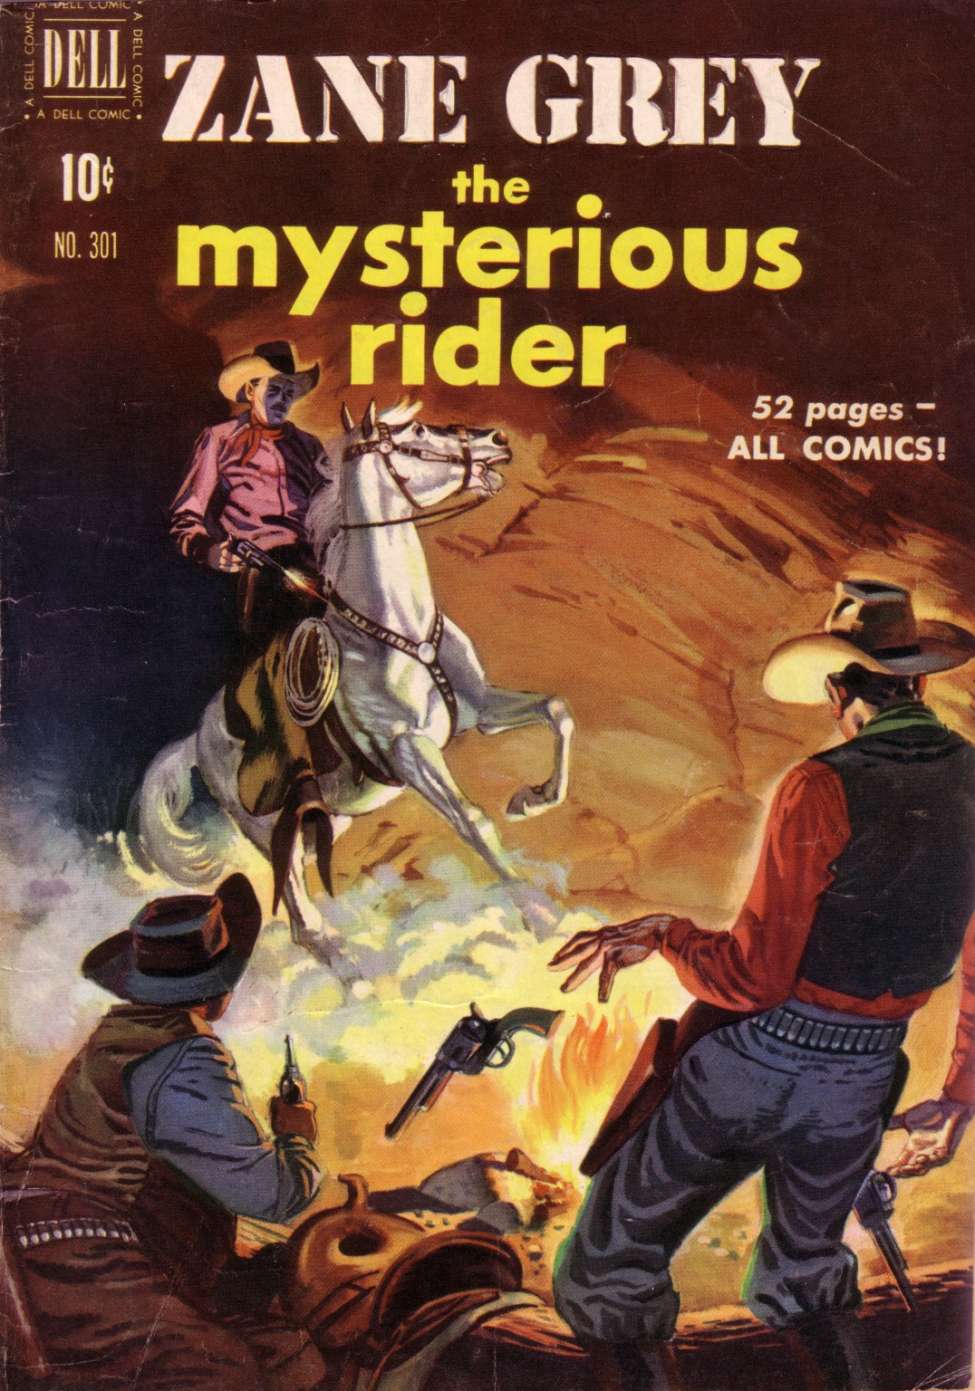 Comic Book Cover For 0301 - Zane Grey's The Mysterious Rider